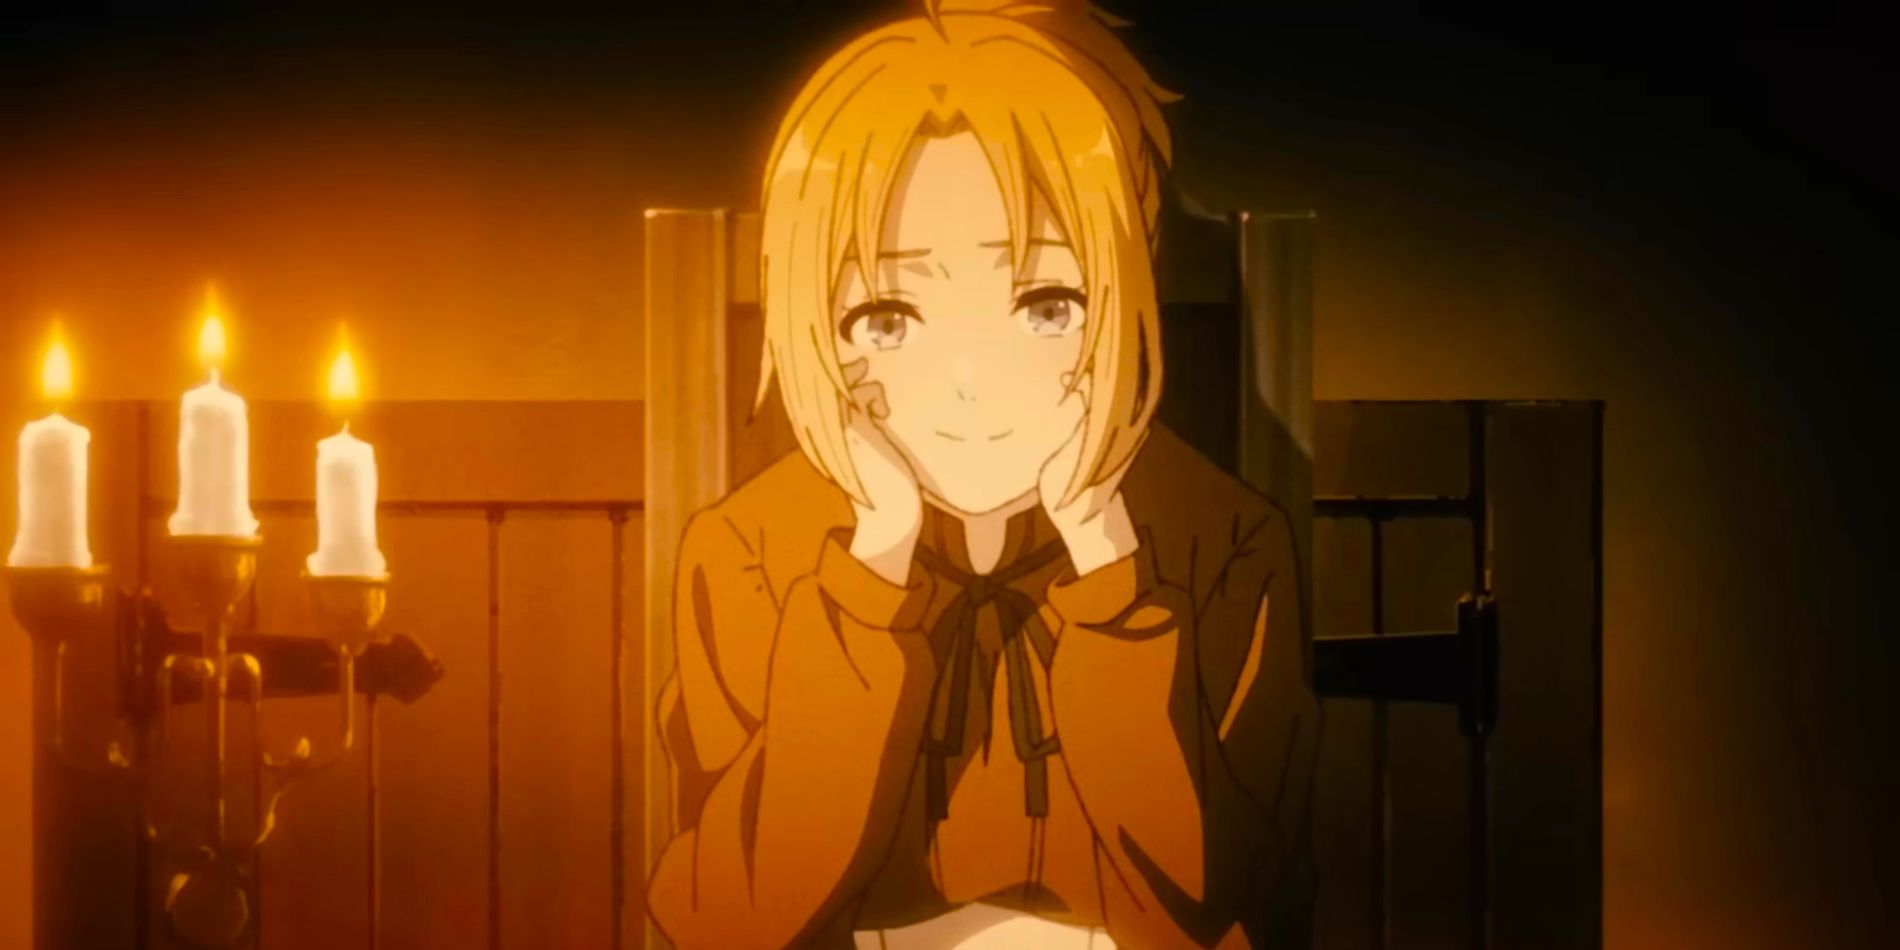 Rudy's mother from Mushoku Tensei with her hands on her cheeks smiling while sitting at a dinner table.